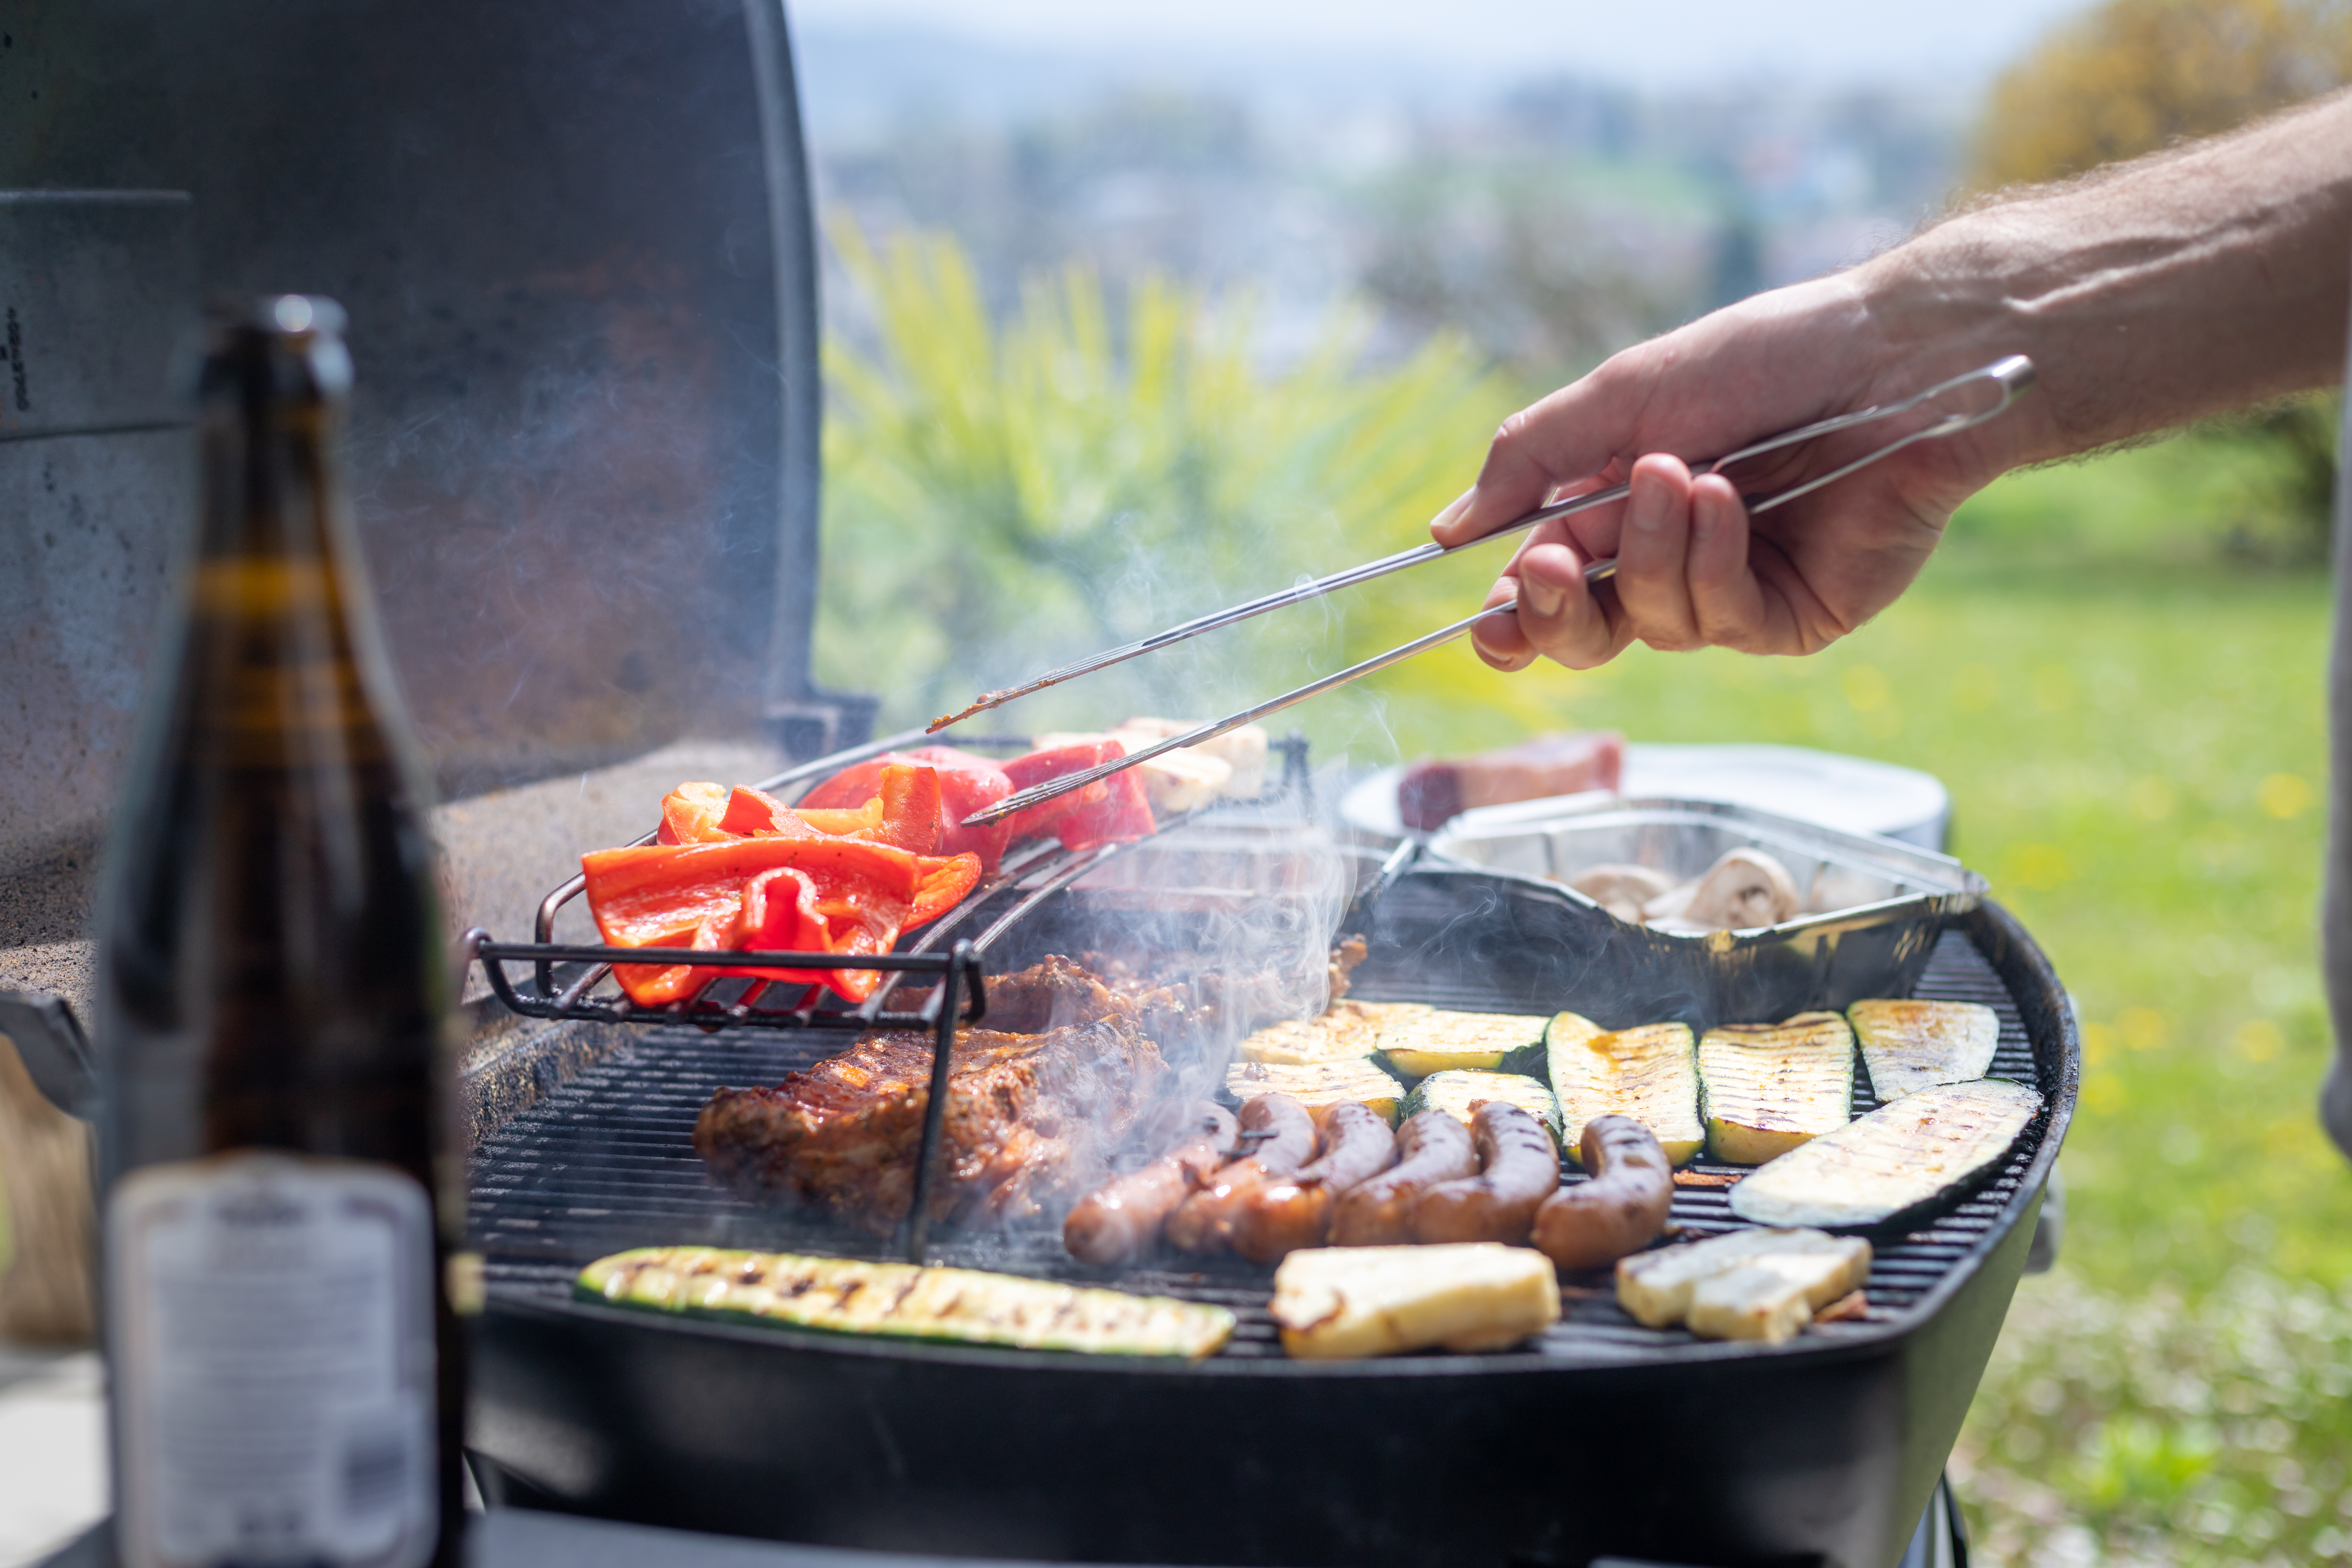 Are gas grills safe? Expert advice on how to grill safely